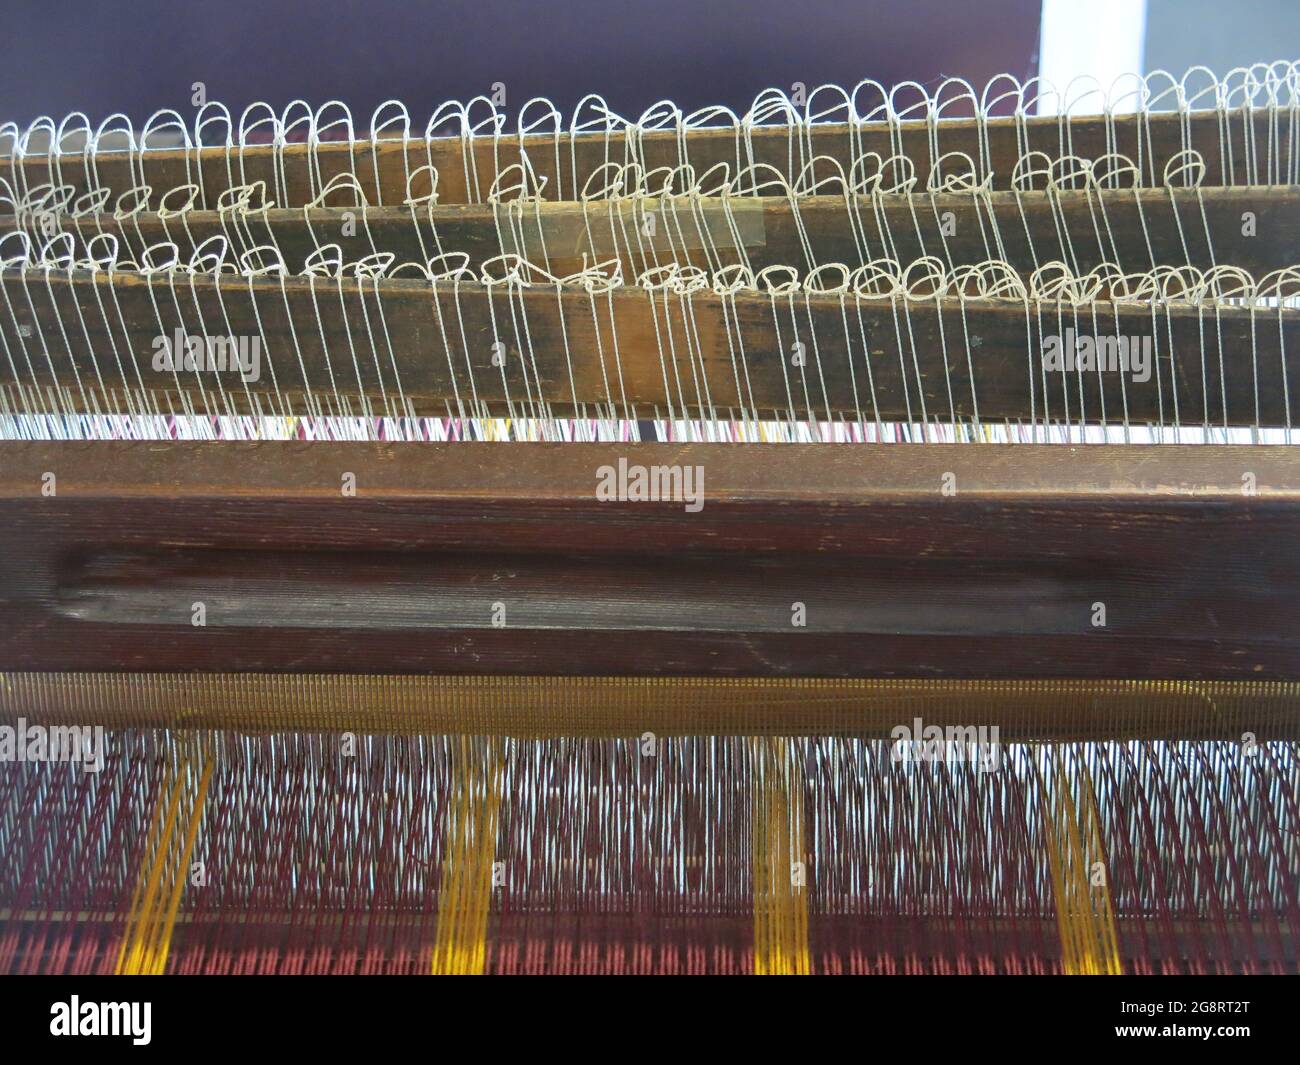 Weaving was one of the earliest industries in Lanarkshire; a loom is on display at the Summerlee Museum of Scottish Industrial Heritage. Stock Photo